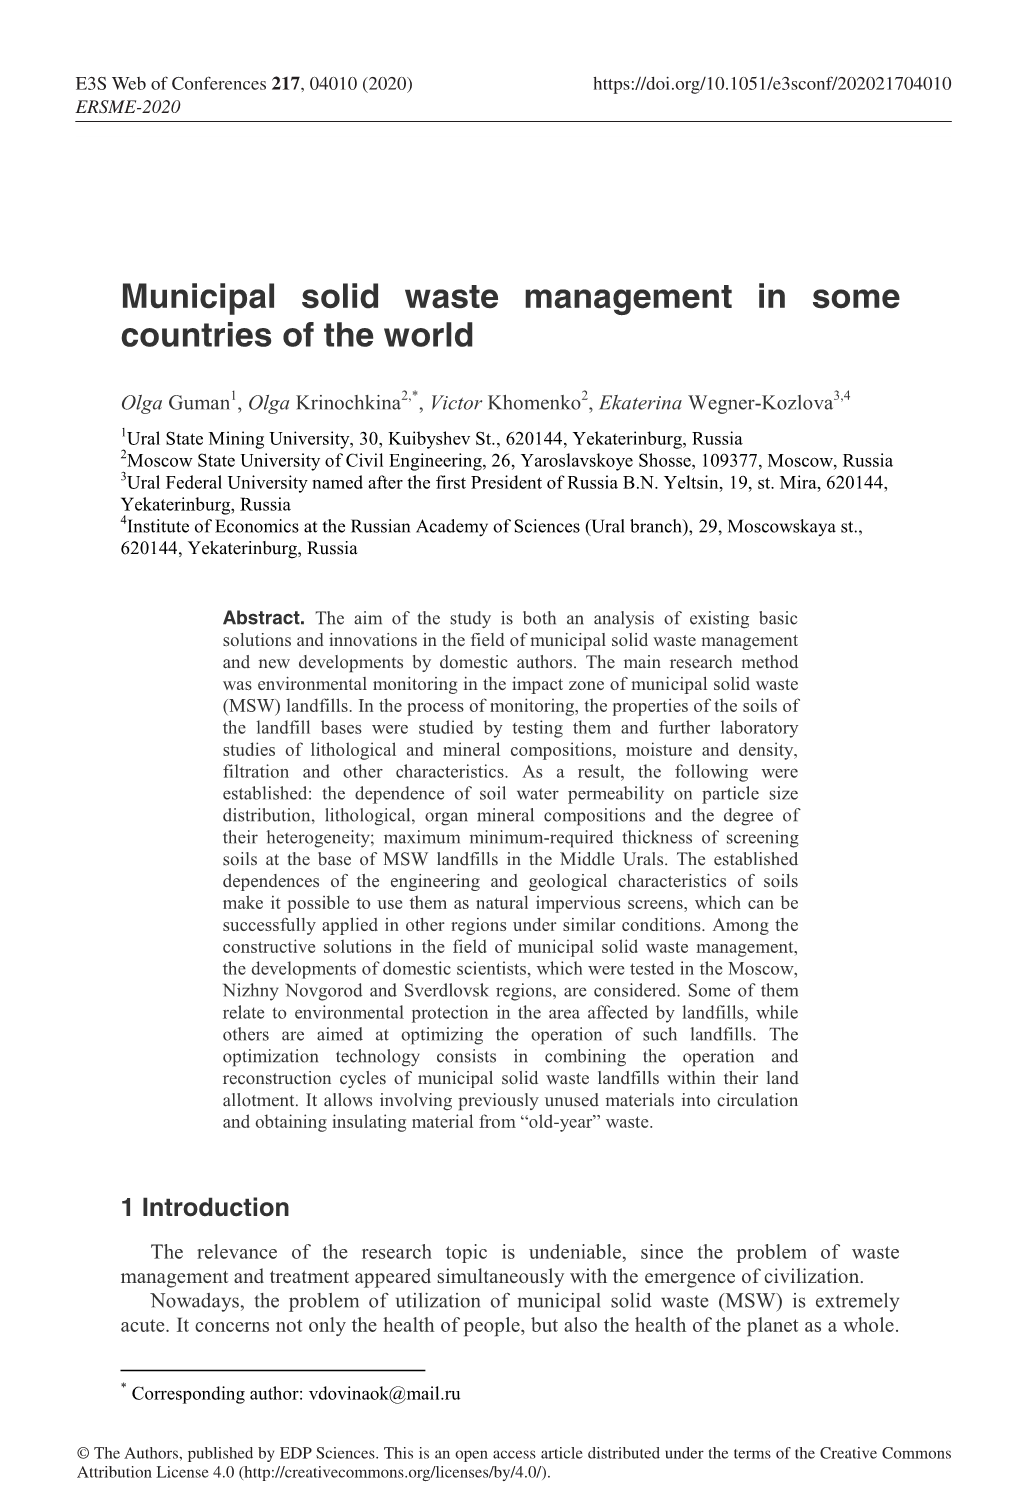 Municipal Solid Waste Management in Some Countries of the World